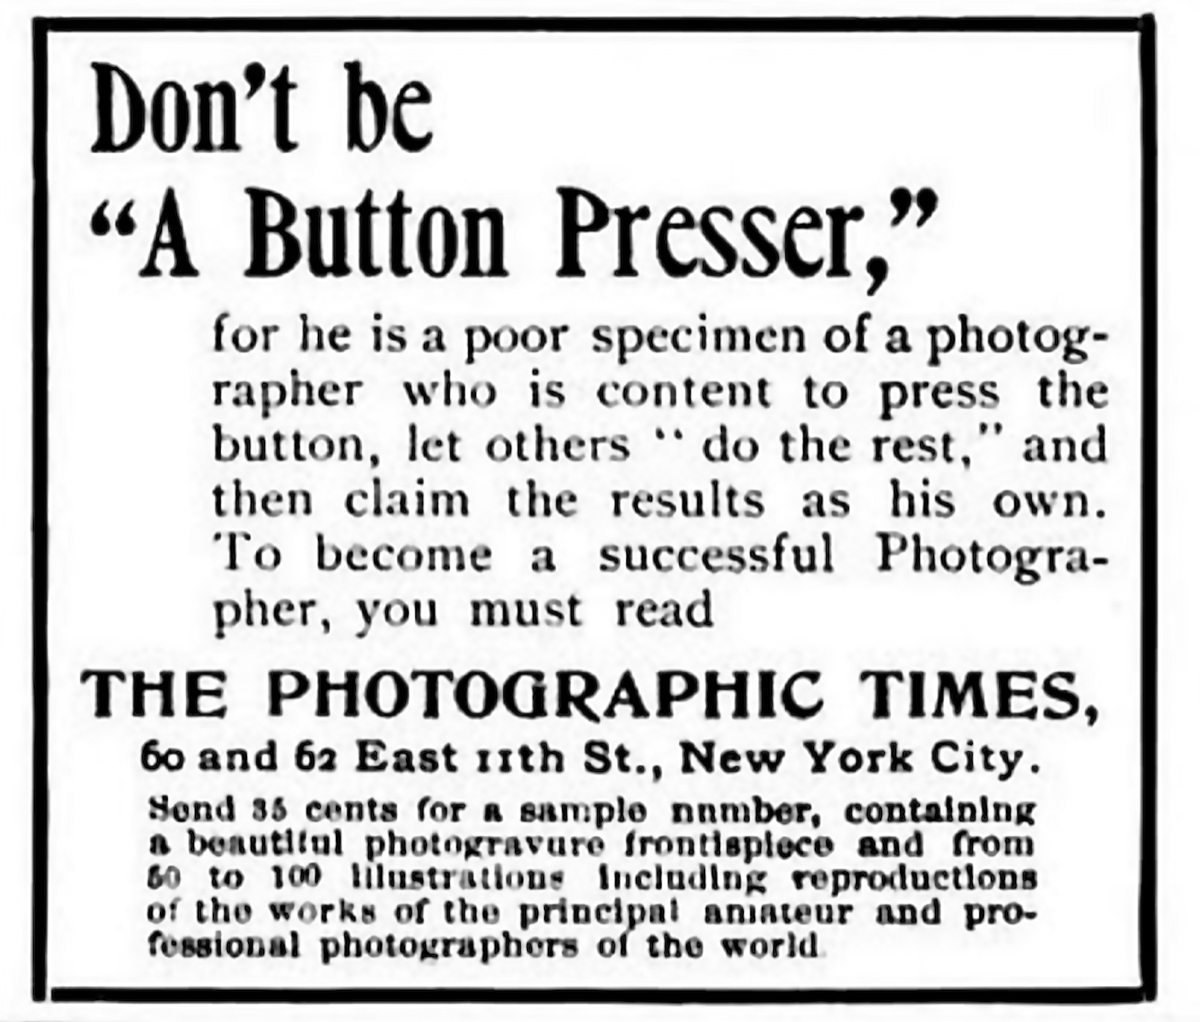 You Press the Button. Kodak Used to Do the Rest.